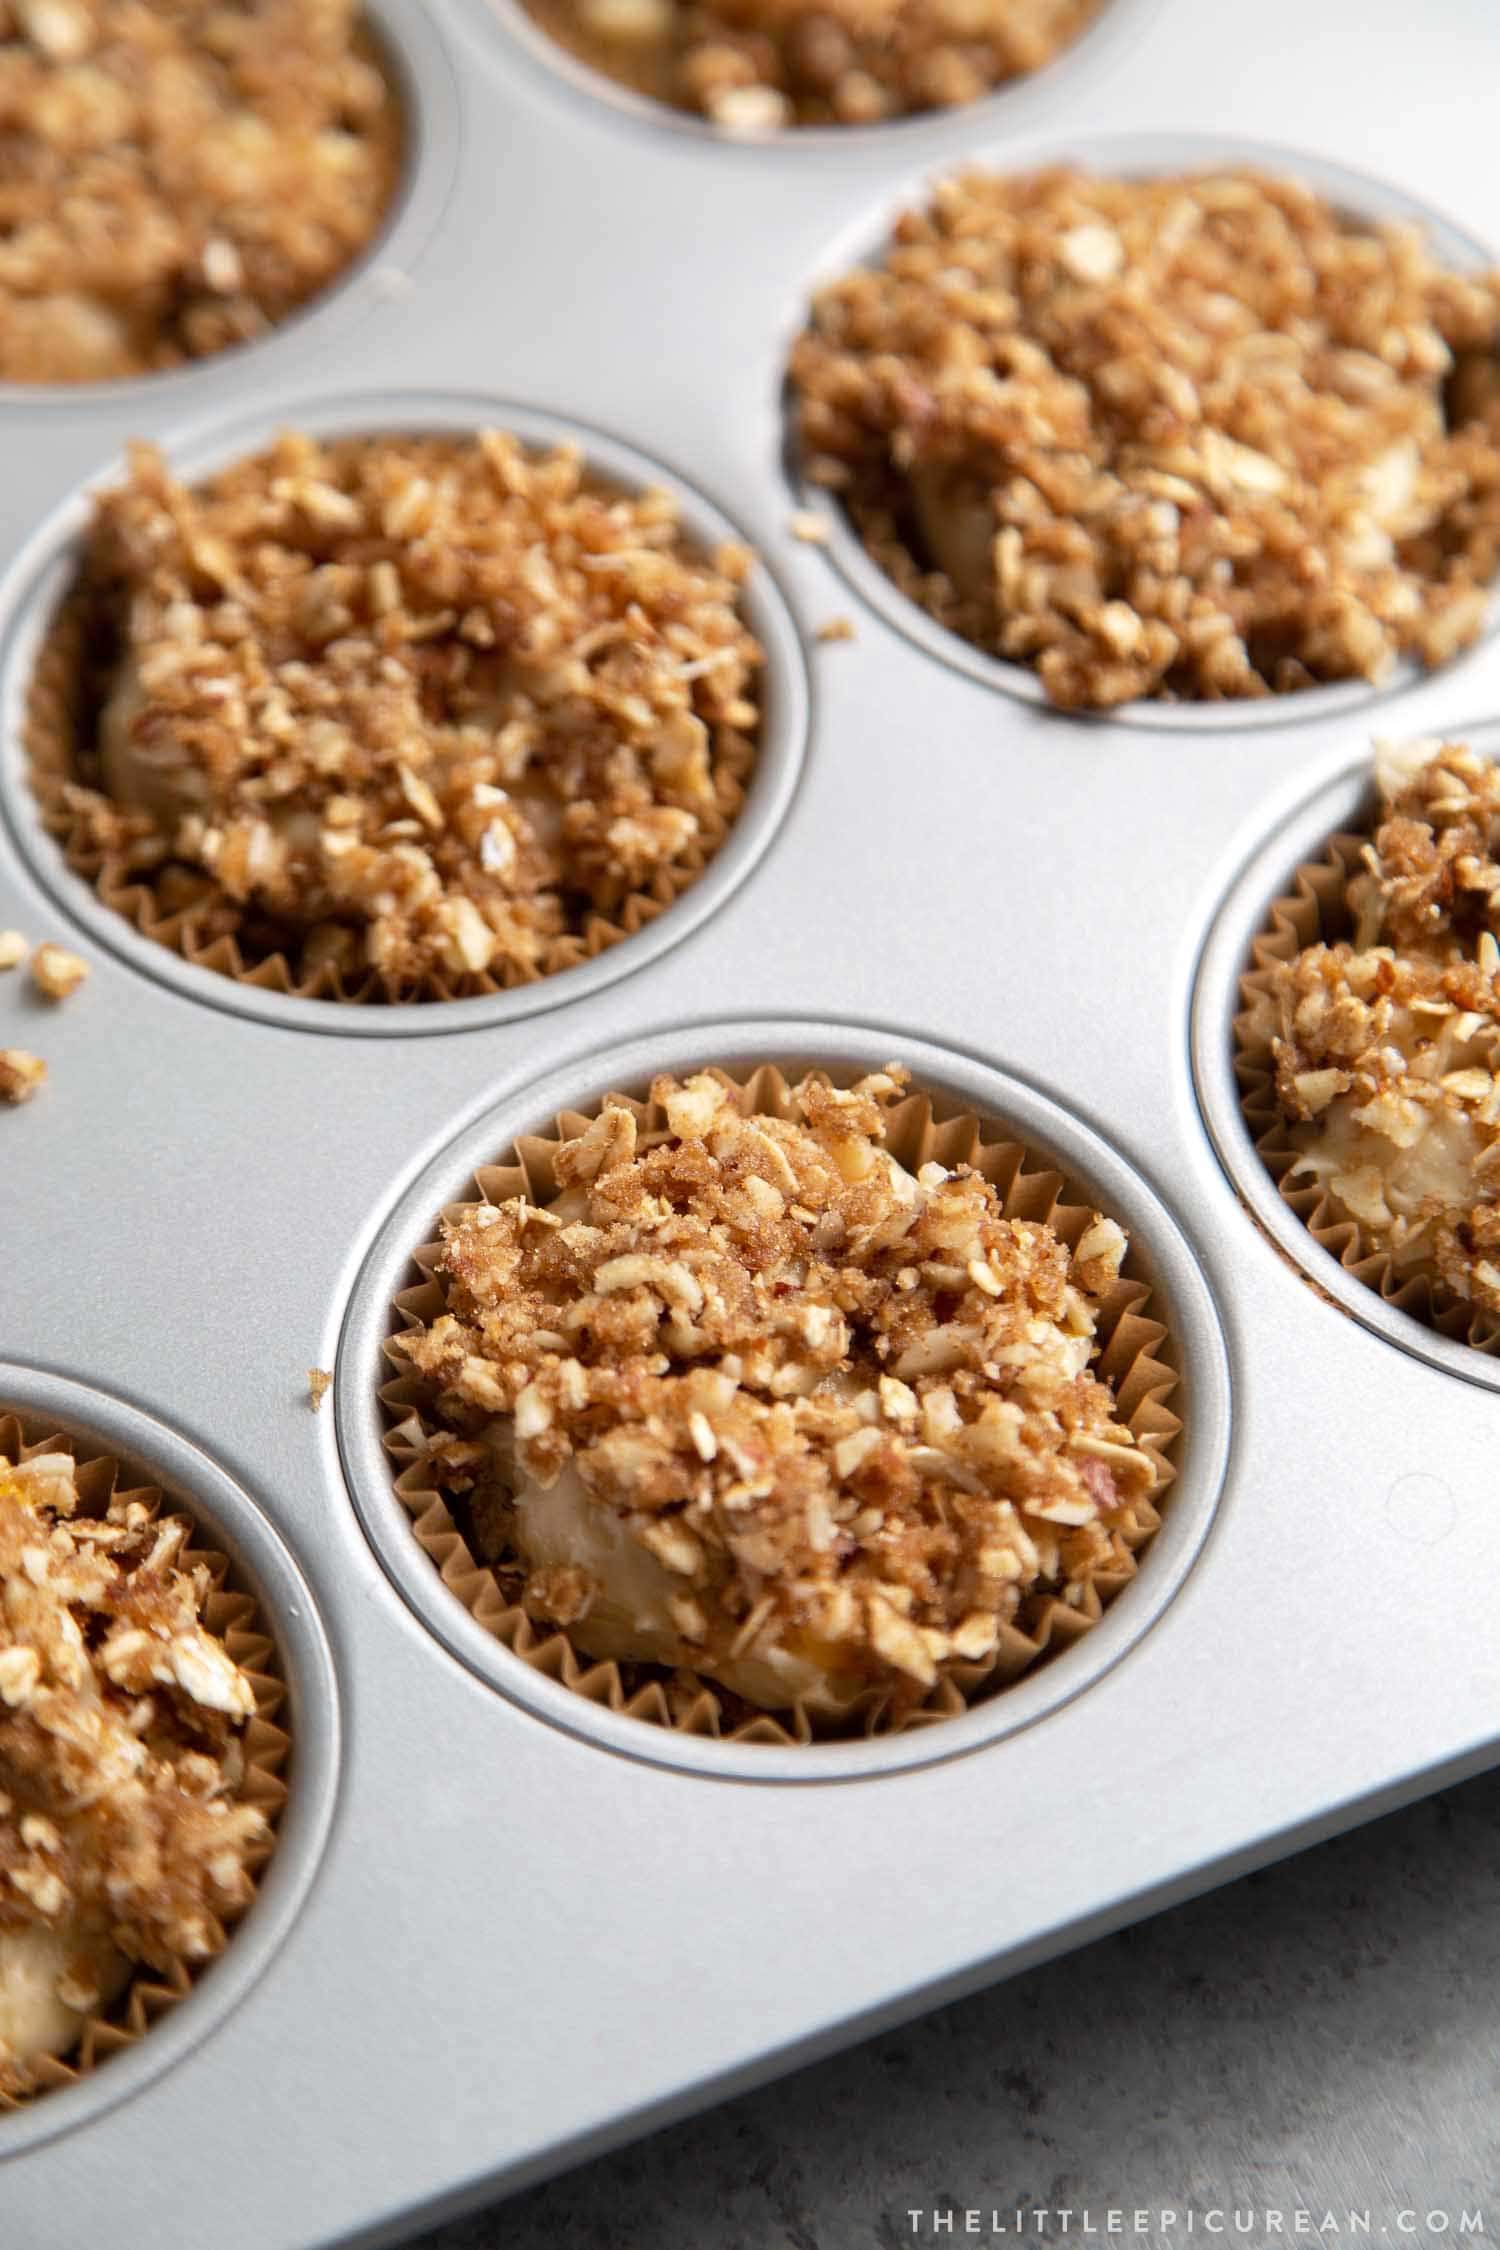 Almond Streusel Peach Muffins. Batter is divided into prepared muffin tin using an ice cream scooper and topped with almond oat streusel. 